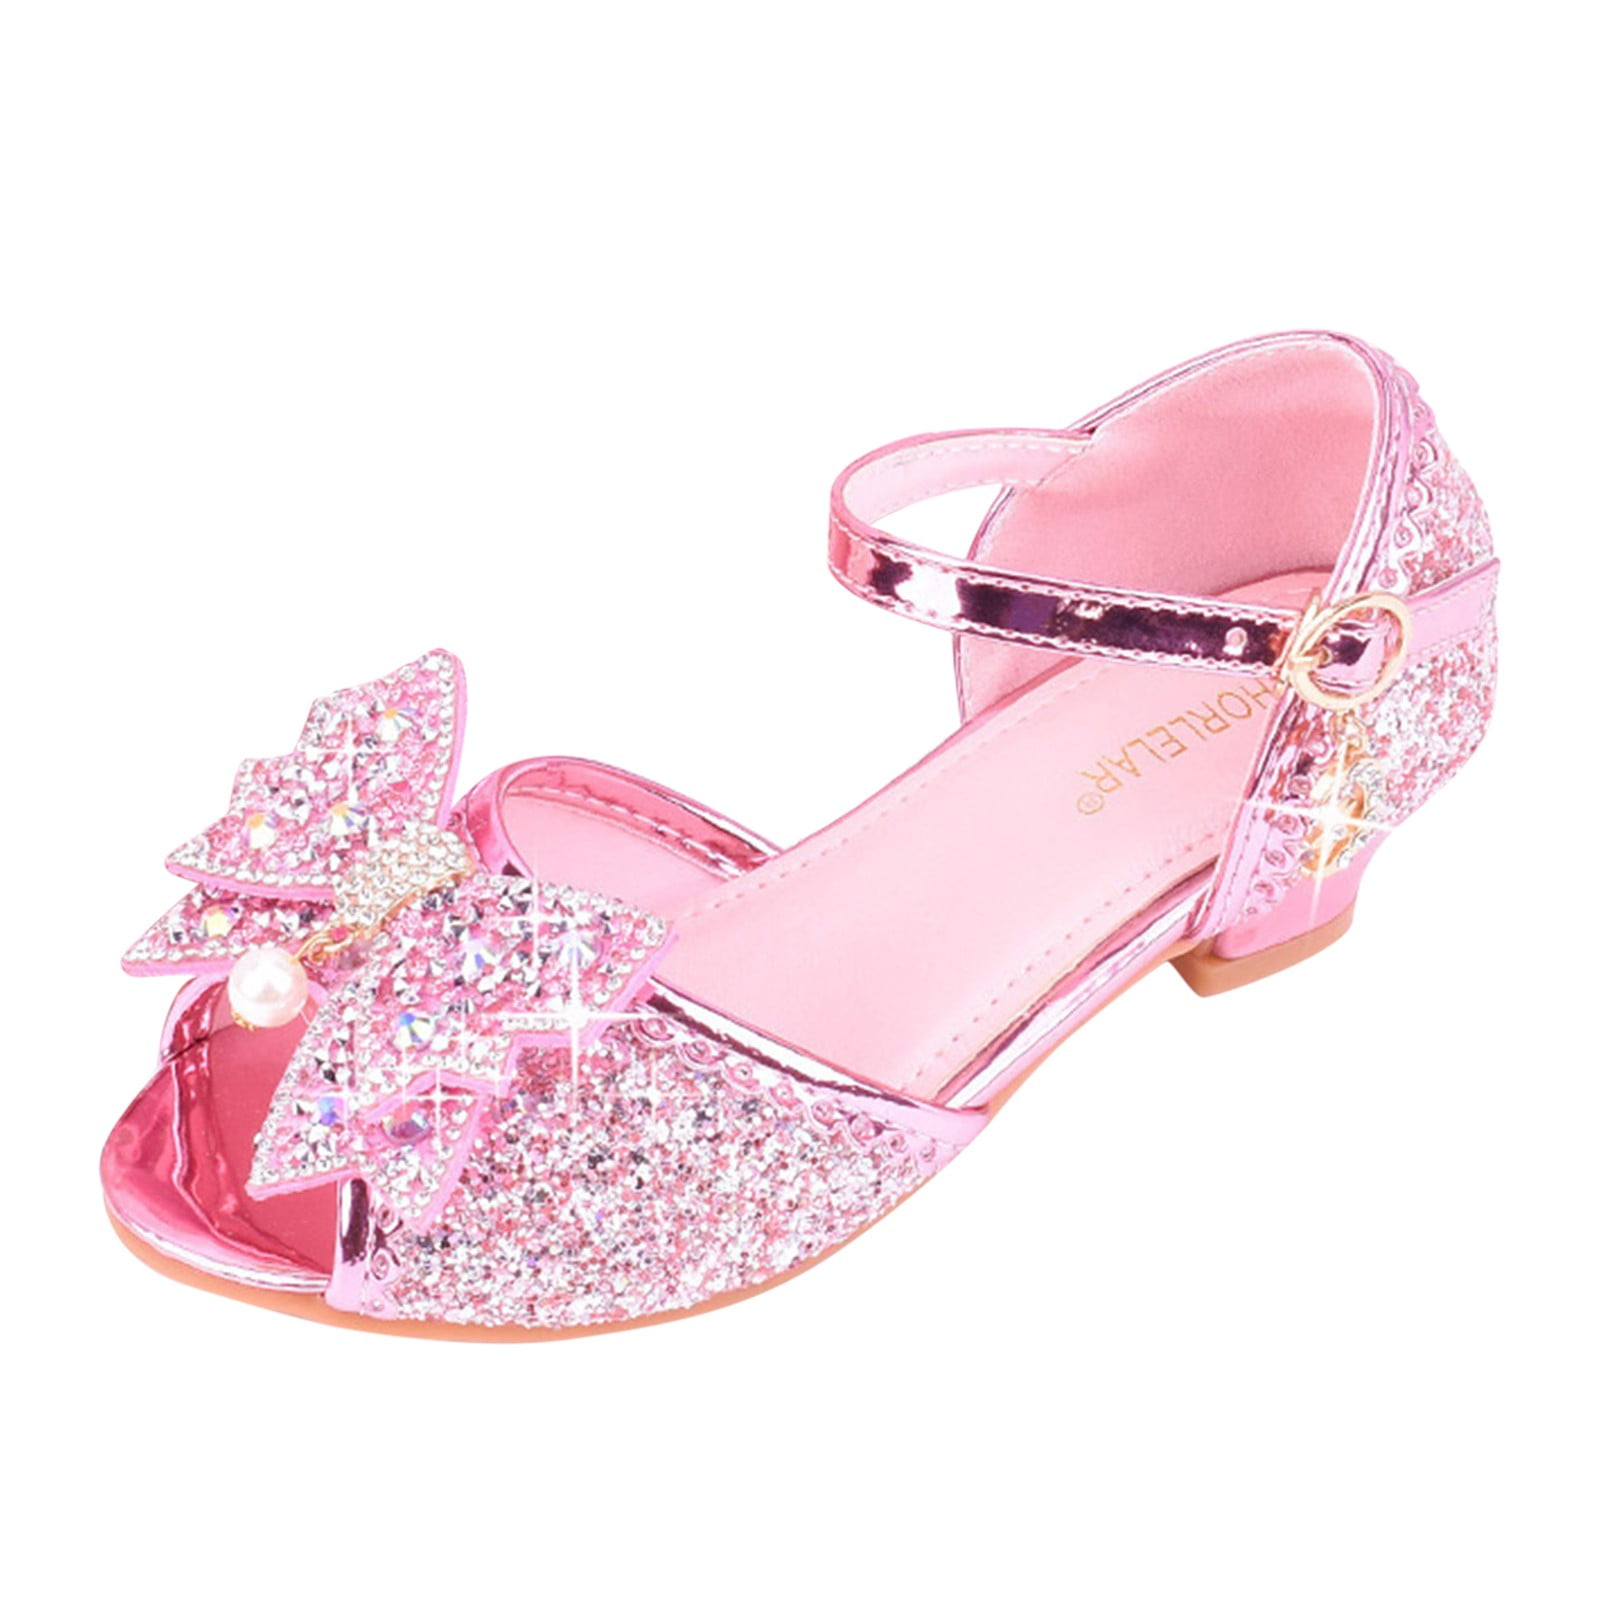 Glittery Butterfly Knot Princess Soft Leather Ballet Pumps For Girls Casual  Flower High Heel Shoes In Blue, Pink, And Silver 2020 Collection From  Cow04, $12.15 | DHgate.Com